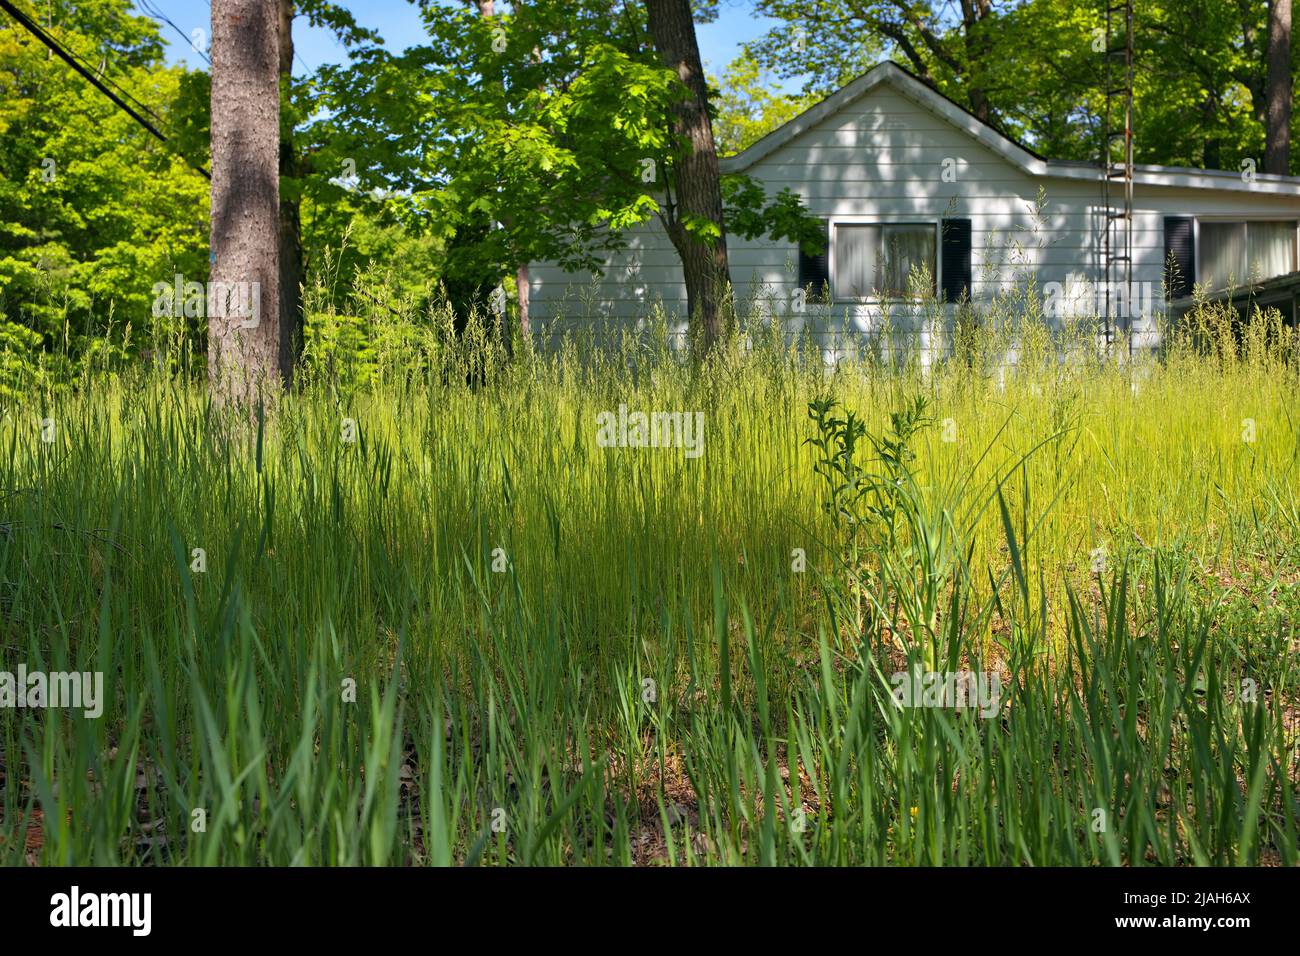 An extremely Overgrown grass lawn in front of a home or cottage in need of trimming and cutting Stock Photo